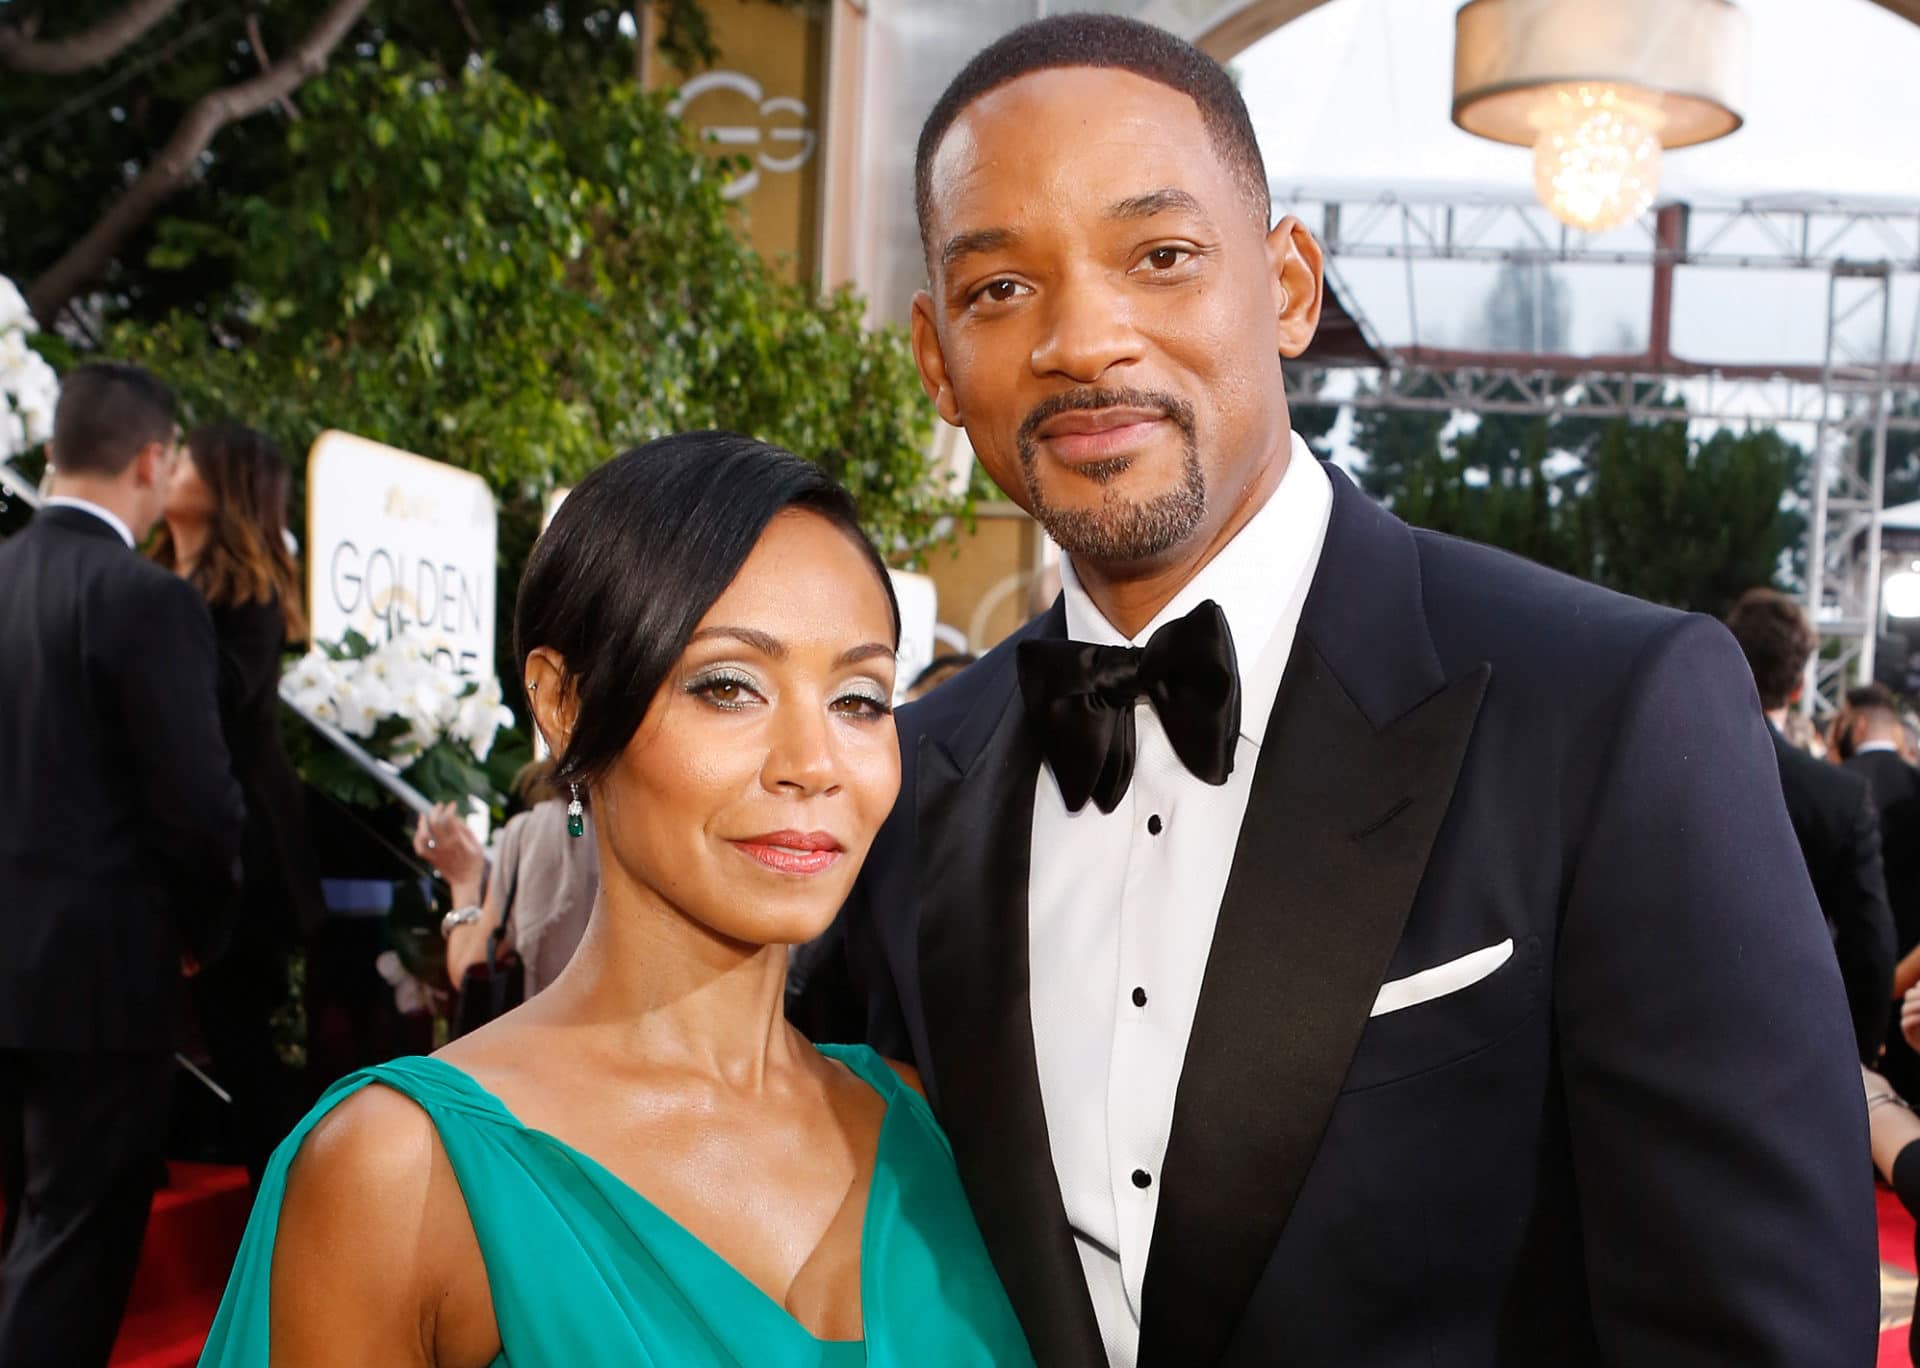 Jada Pinkett Smith Explains Why She And Will Smith Don't Celebrate Their Wedding Anniversary